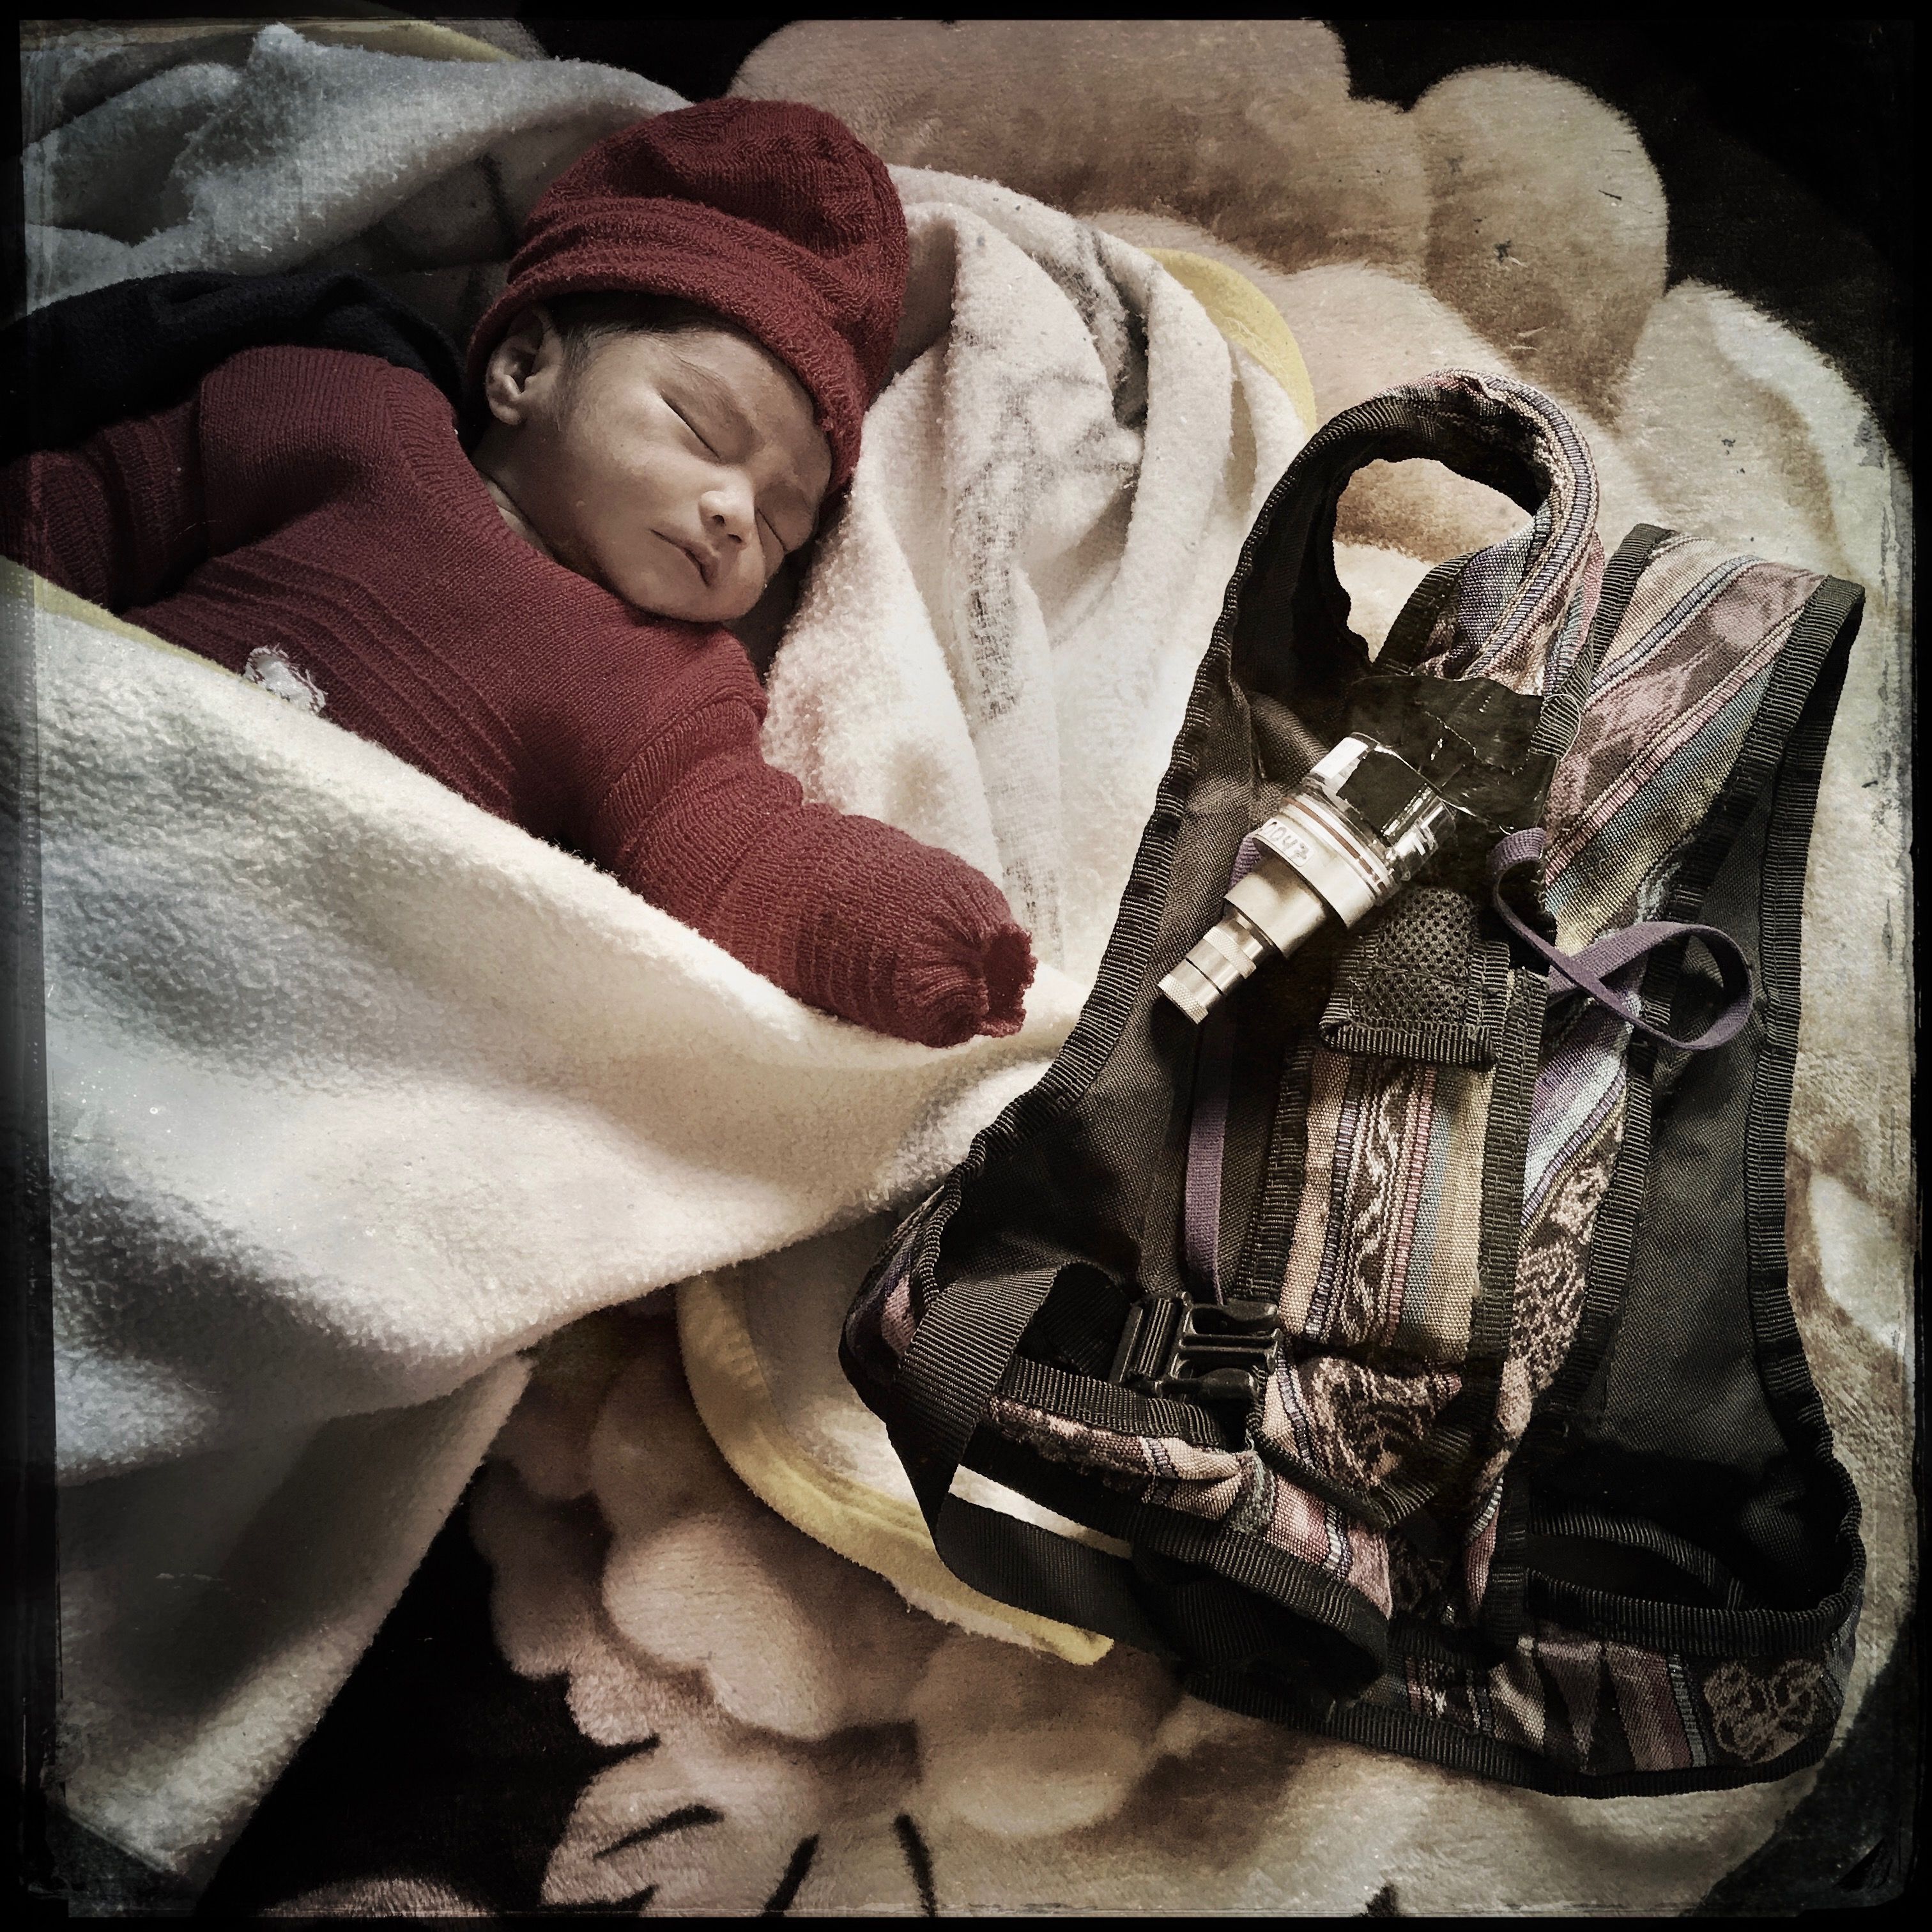 In the highlands of Guatemala, Dina Marroquín’s eight-day-old baby rests next to a knapsack holding an indoor air monitor—part of study to determine whether the use of gas stoves improves household air quality and children’s health. Photo by Lynn Johnson. Guatemala, 2017.